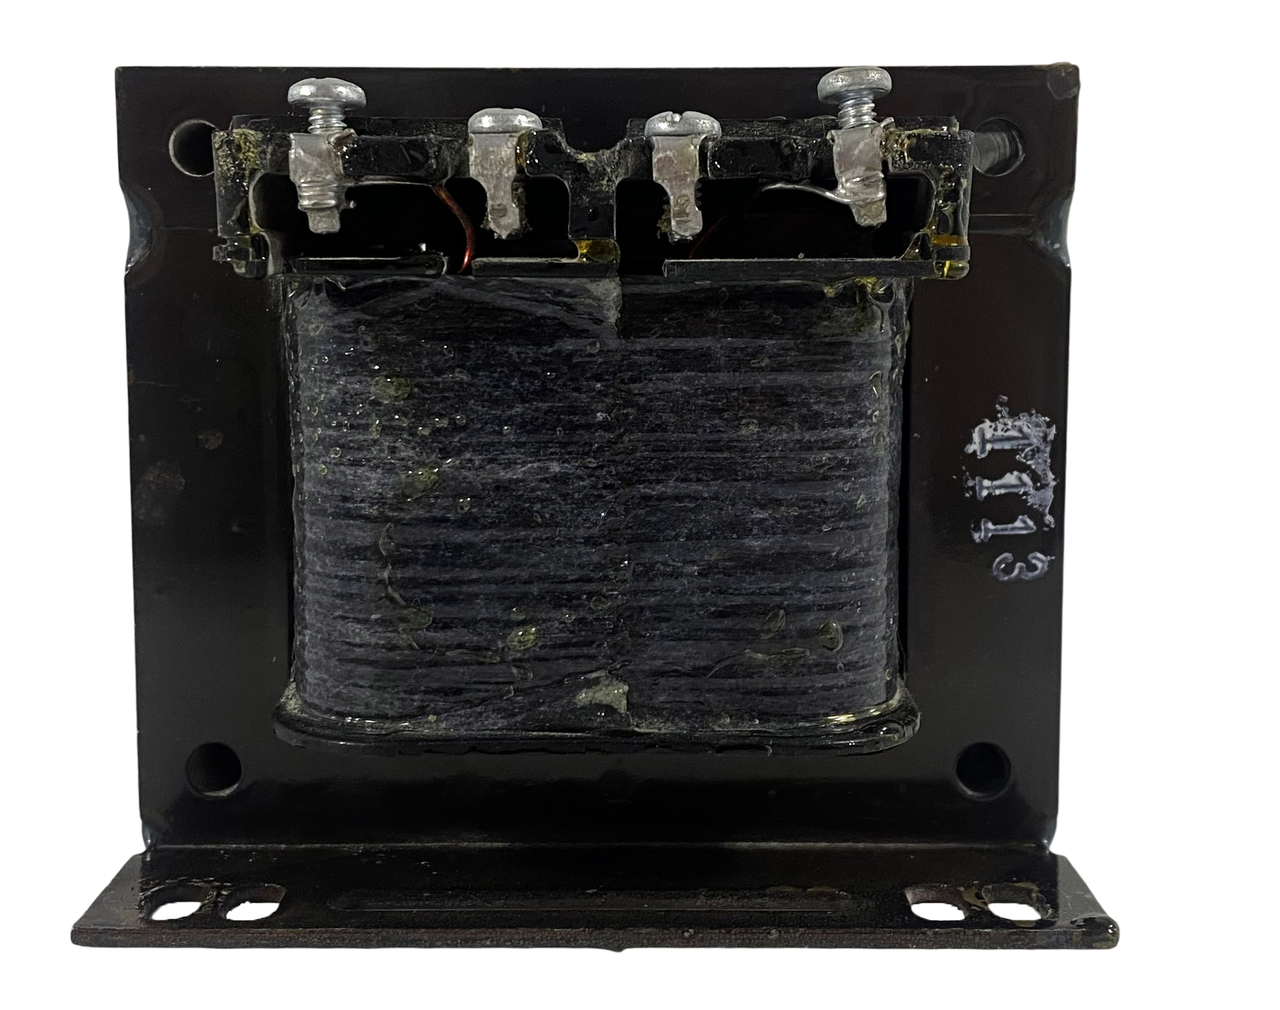 Square D 9070T200D1 Transformer 200VA 1PH P:240x480V S:120V 50/60Hz .2kVA Type T Industrial Control